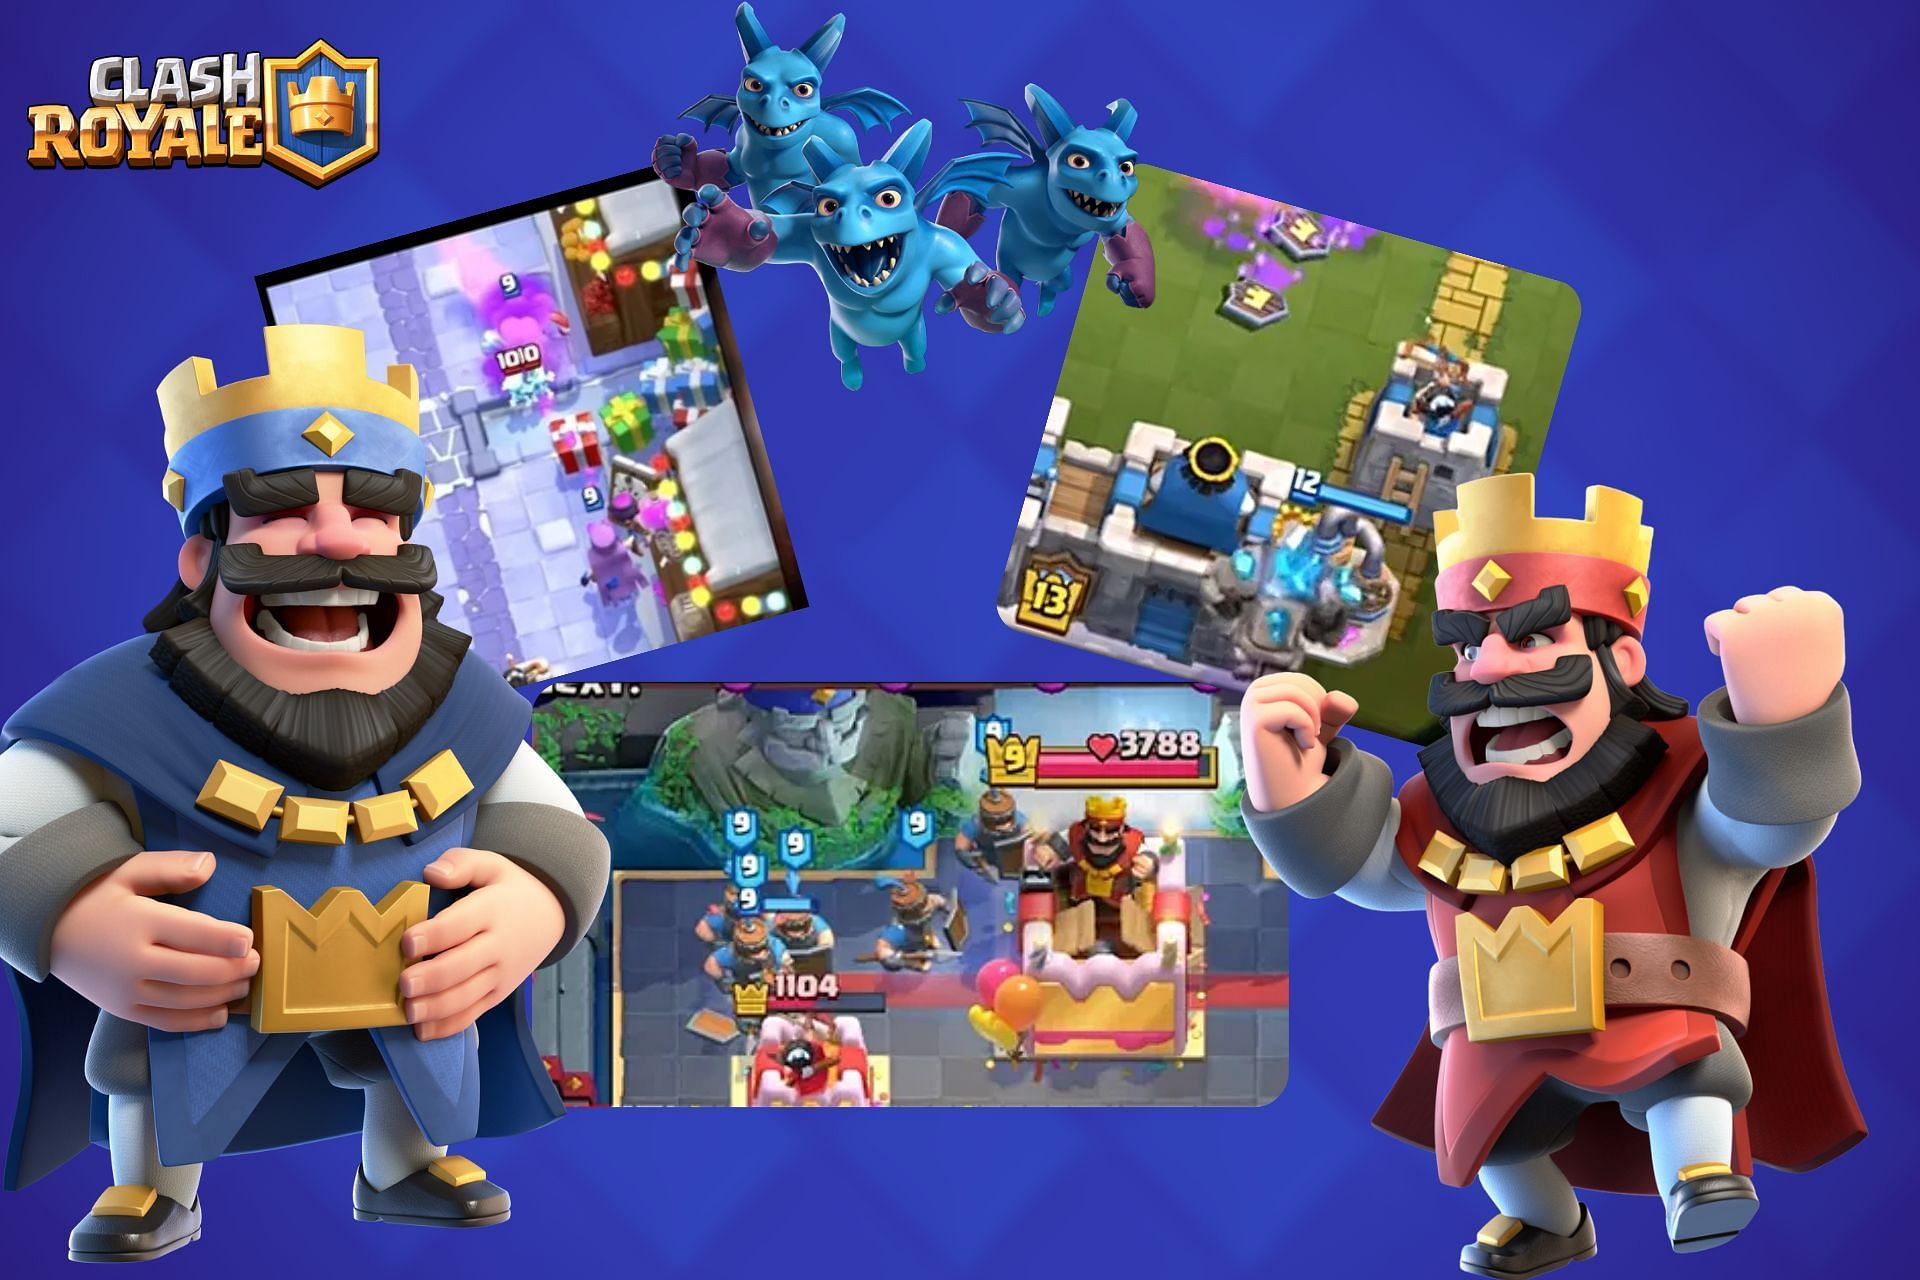 Best Glitches in Clash Royale